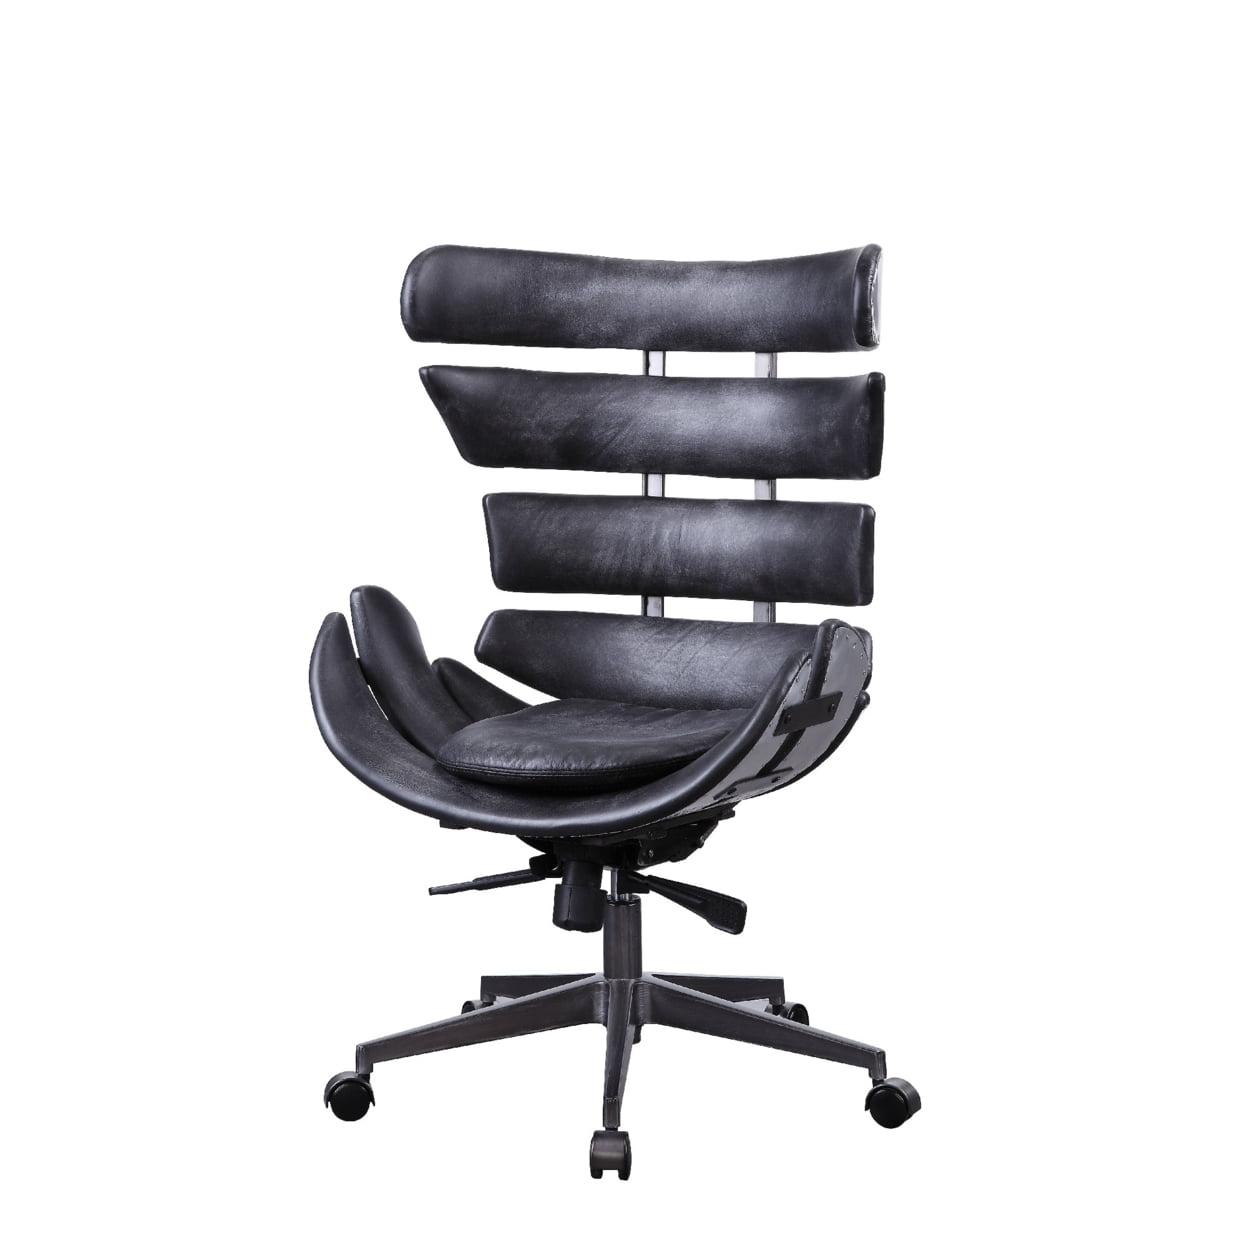 Vintage Black Leather High-Back Swivel Executive Chair